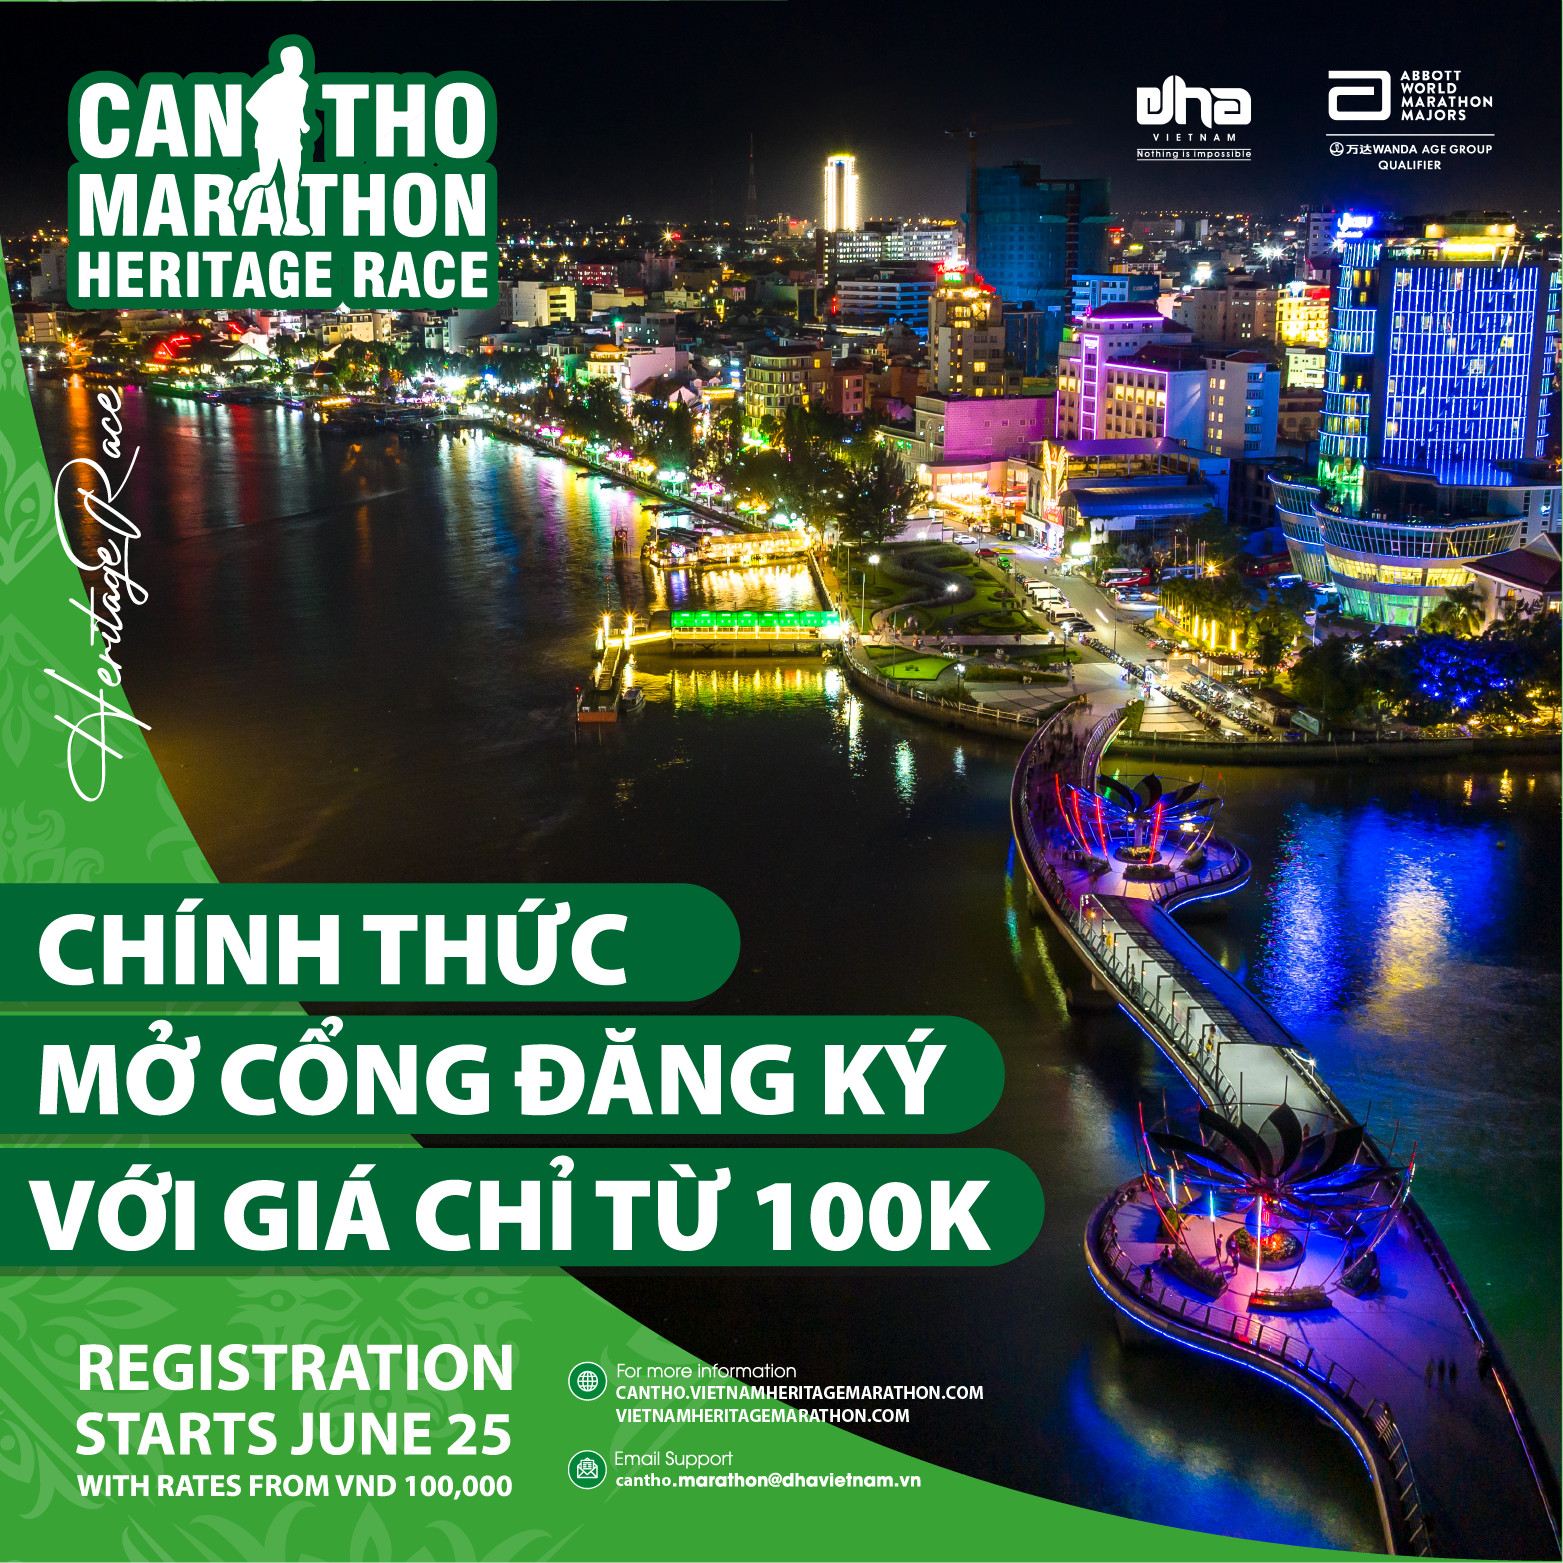 Registration For Can Tho Marathon – A Heritage Race 2022 From June 25